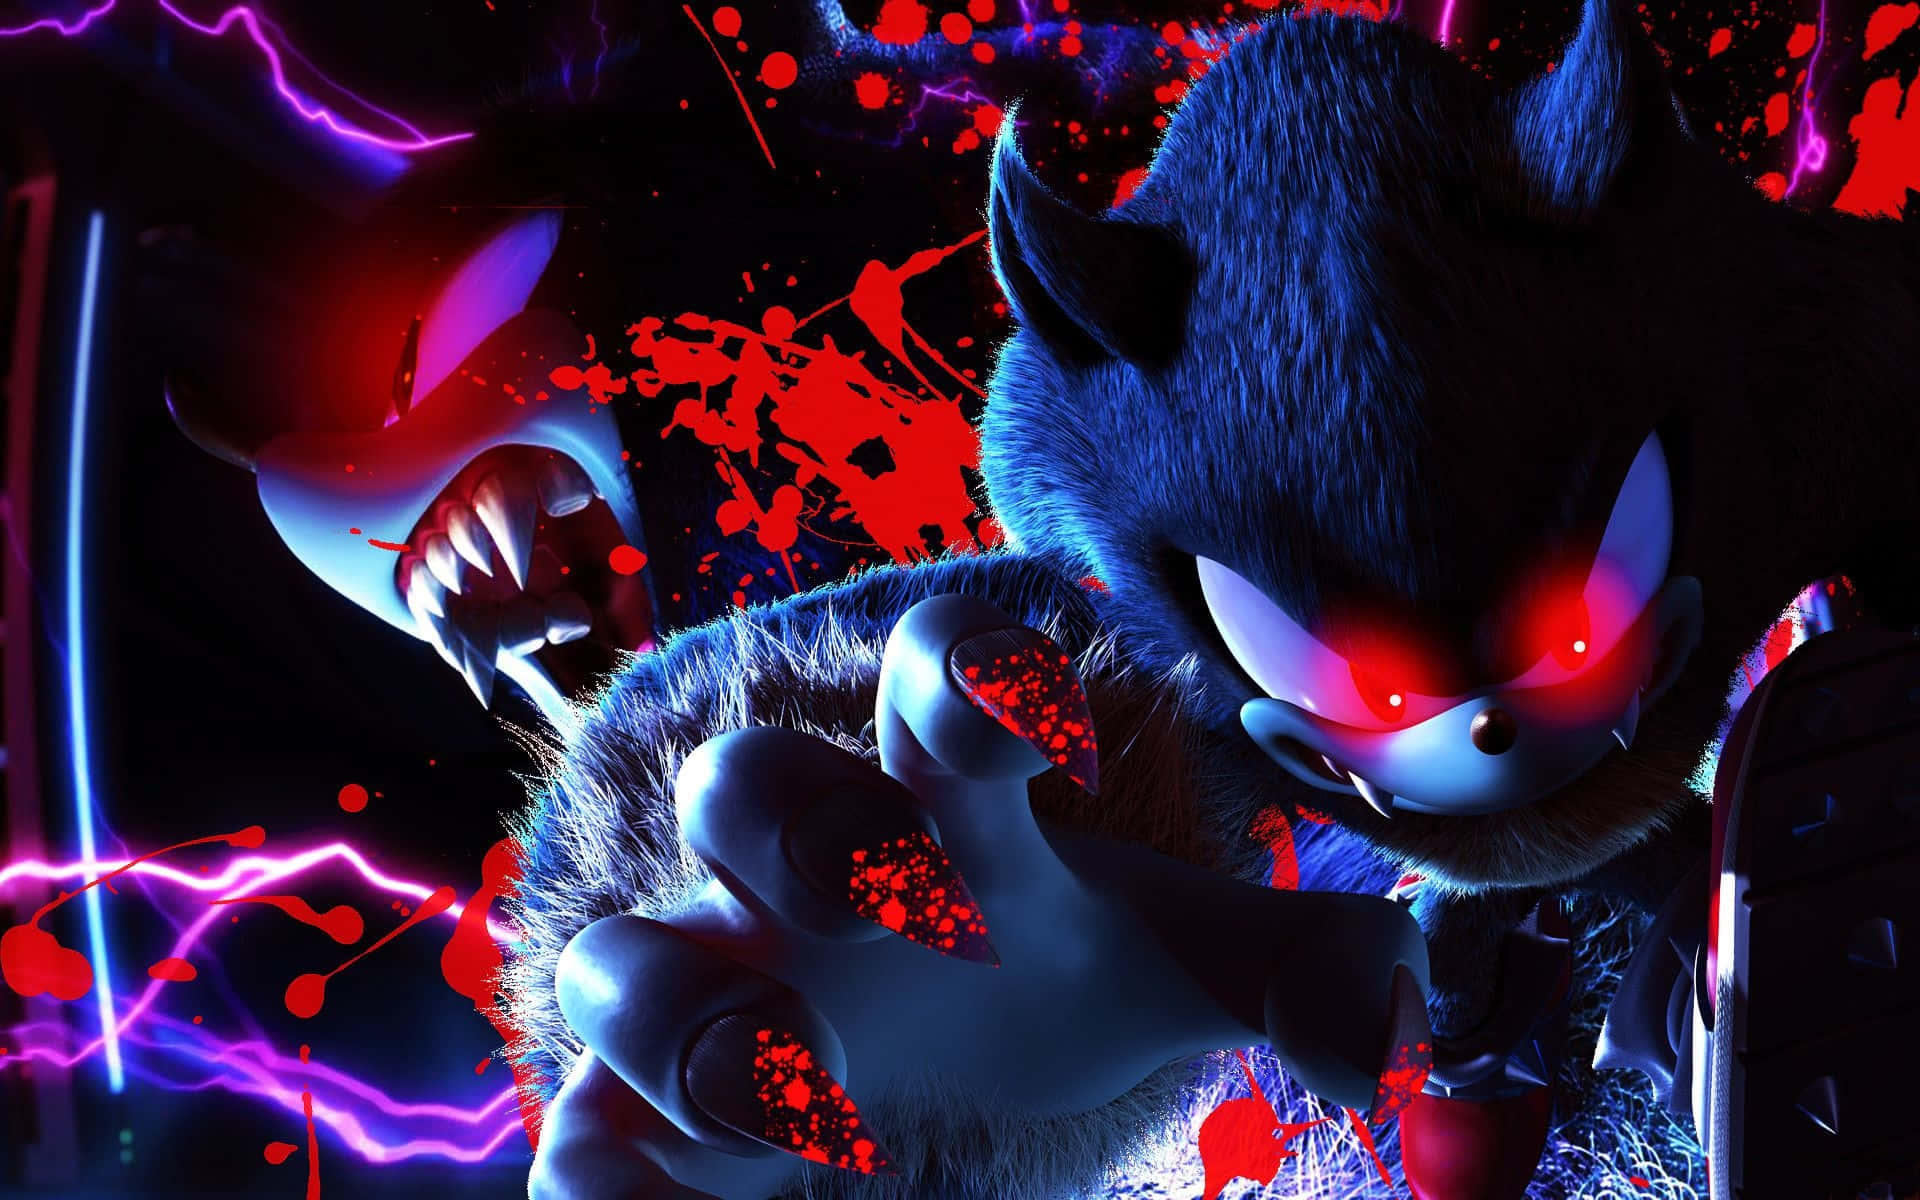 100+] Sonic Exe Pictures